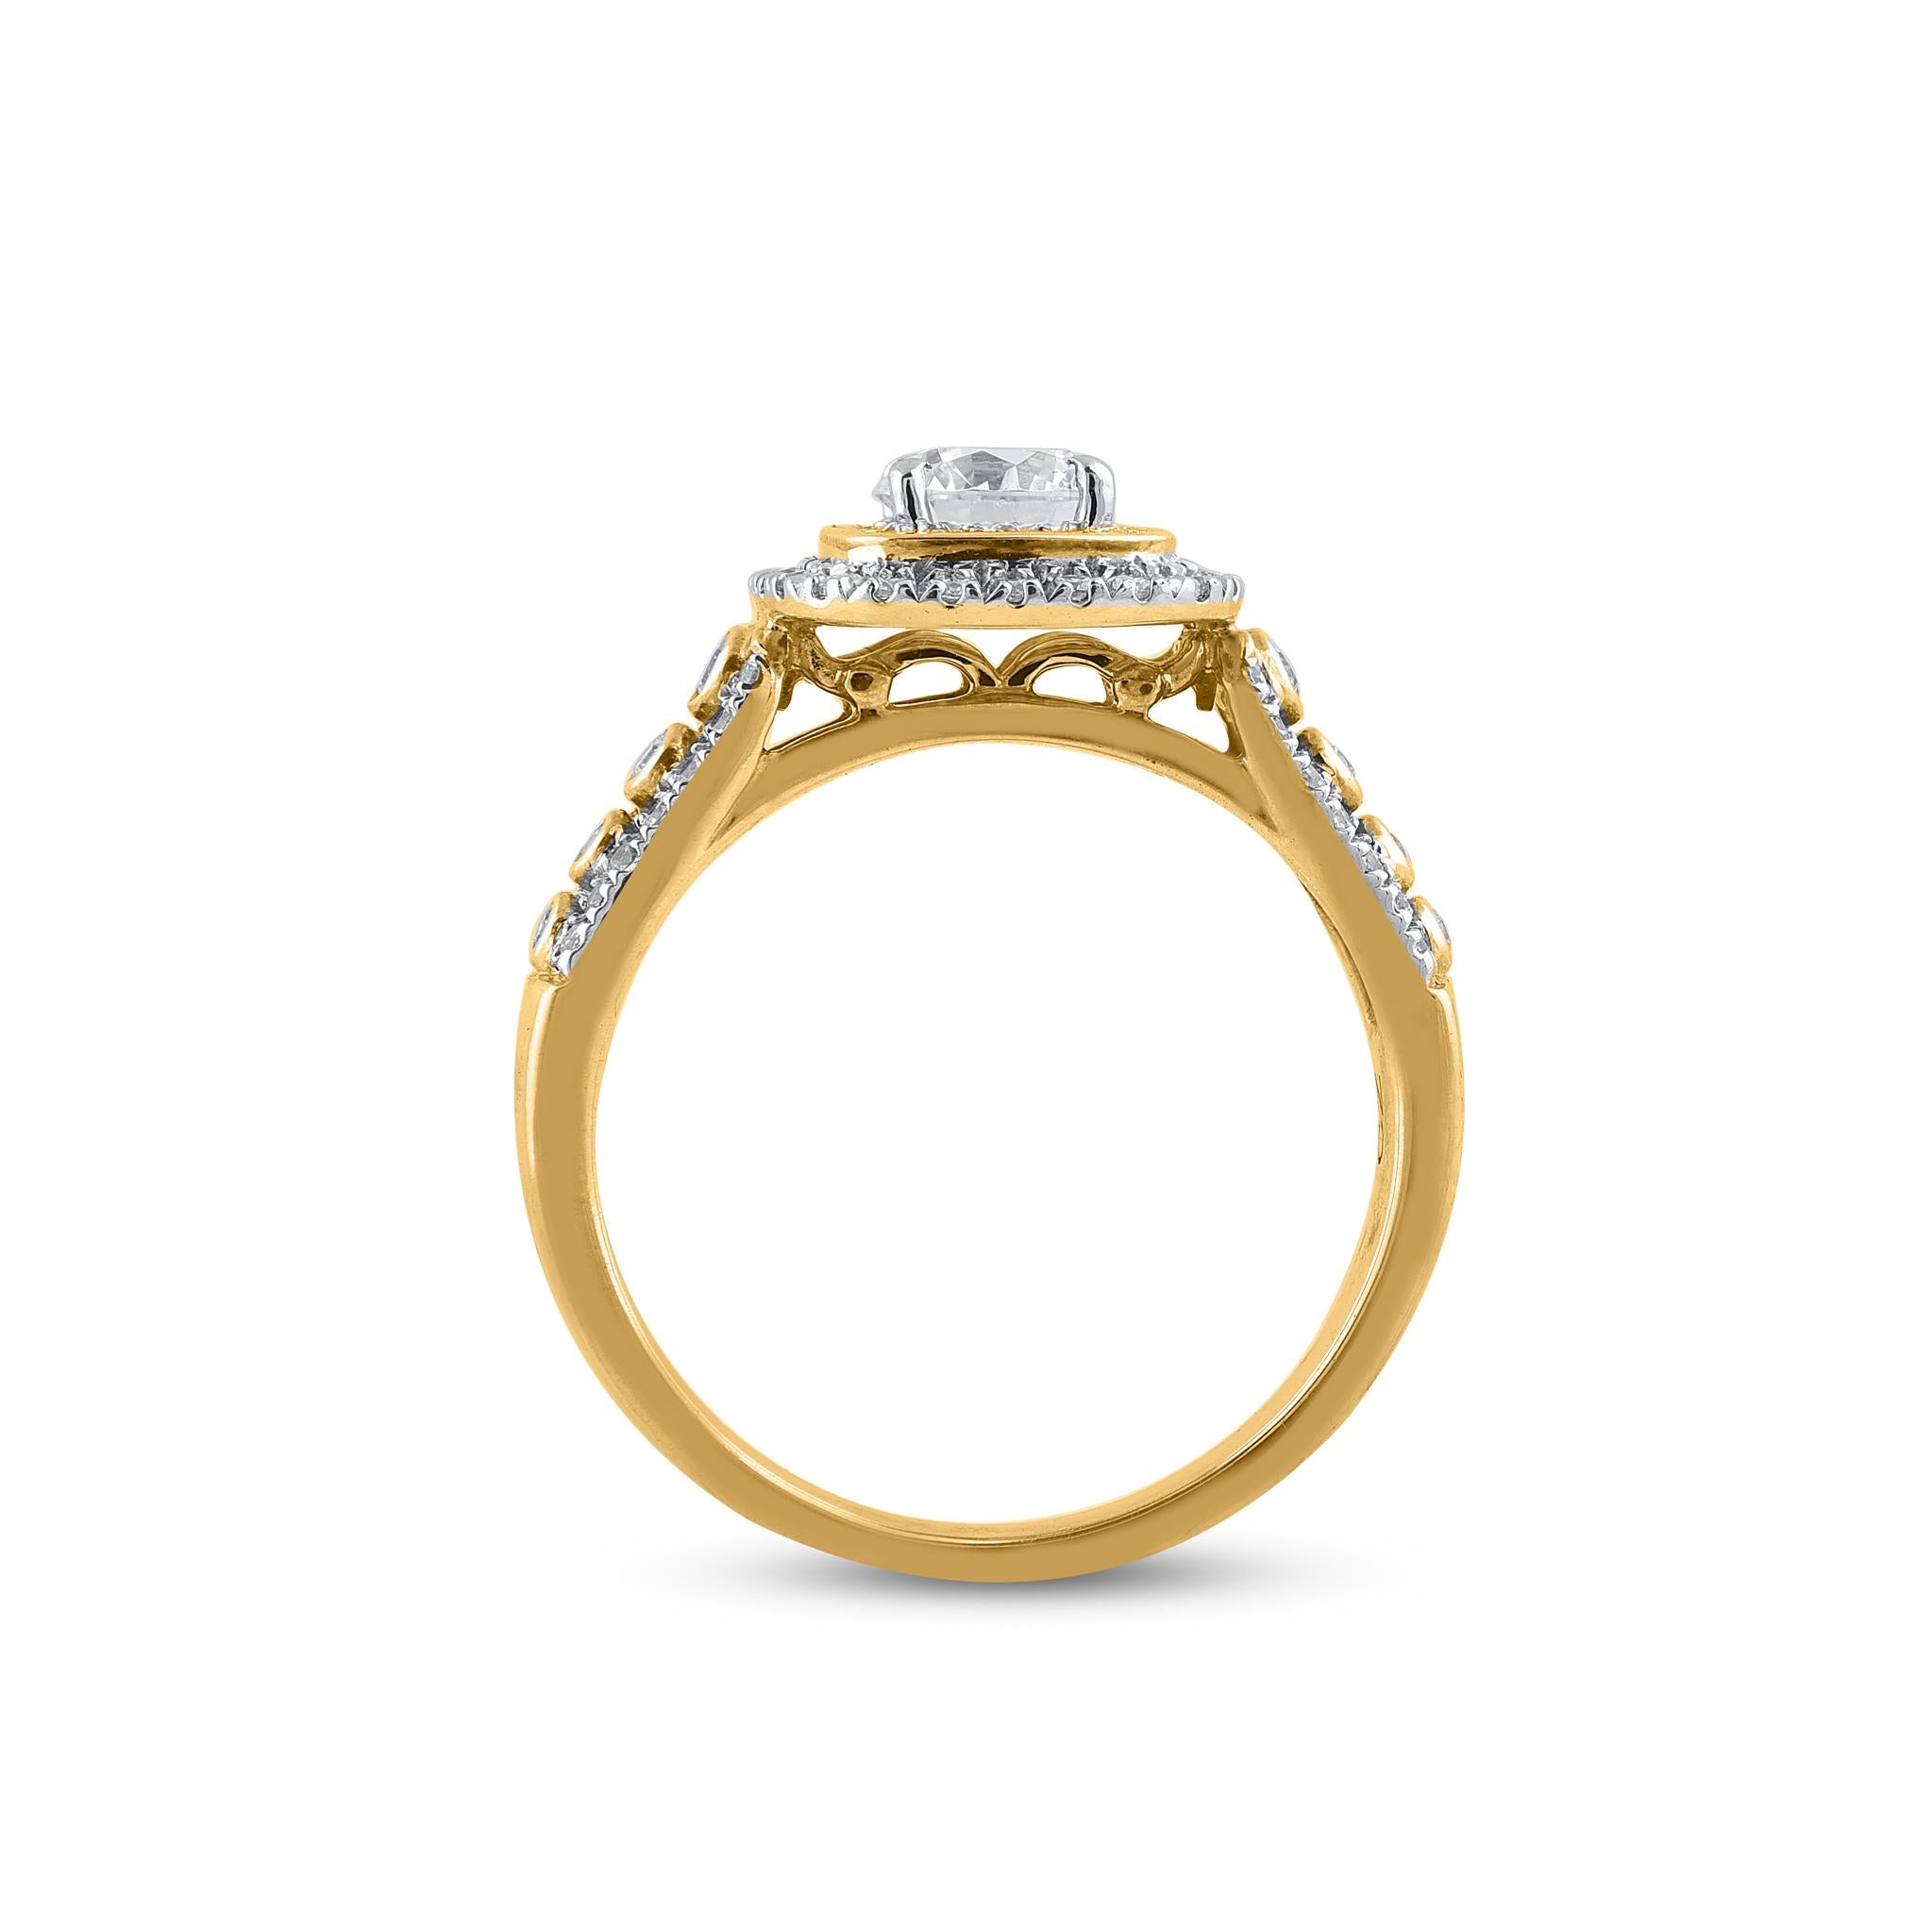 TJD 1.0 Carat Natural Round Diamond 14 Karat Yellow Gold Halo Engagement Ring In New Condition For Sale In New York, NY